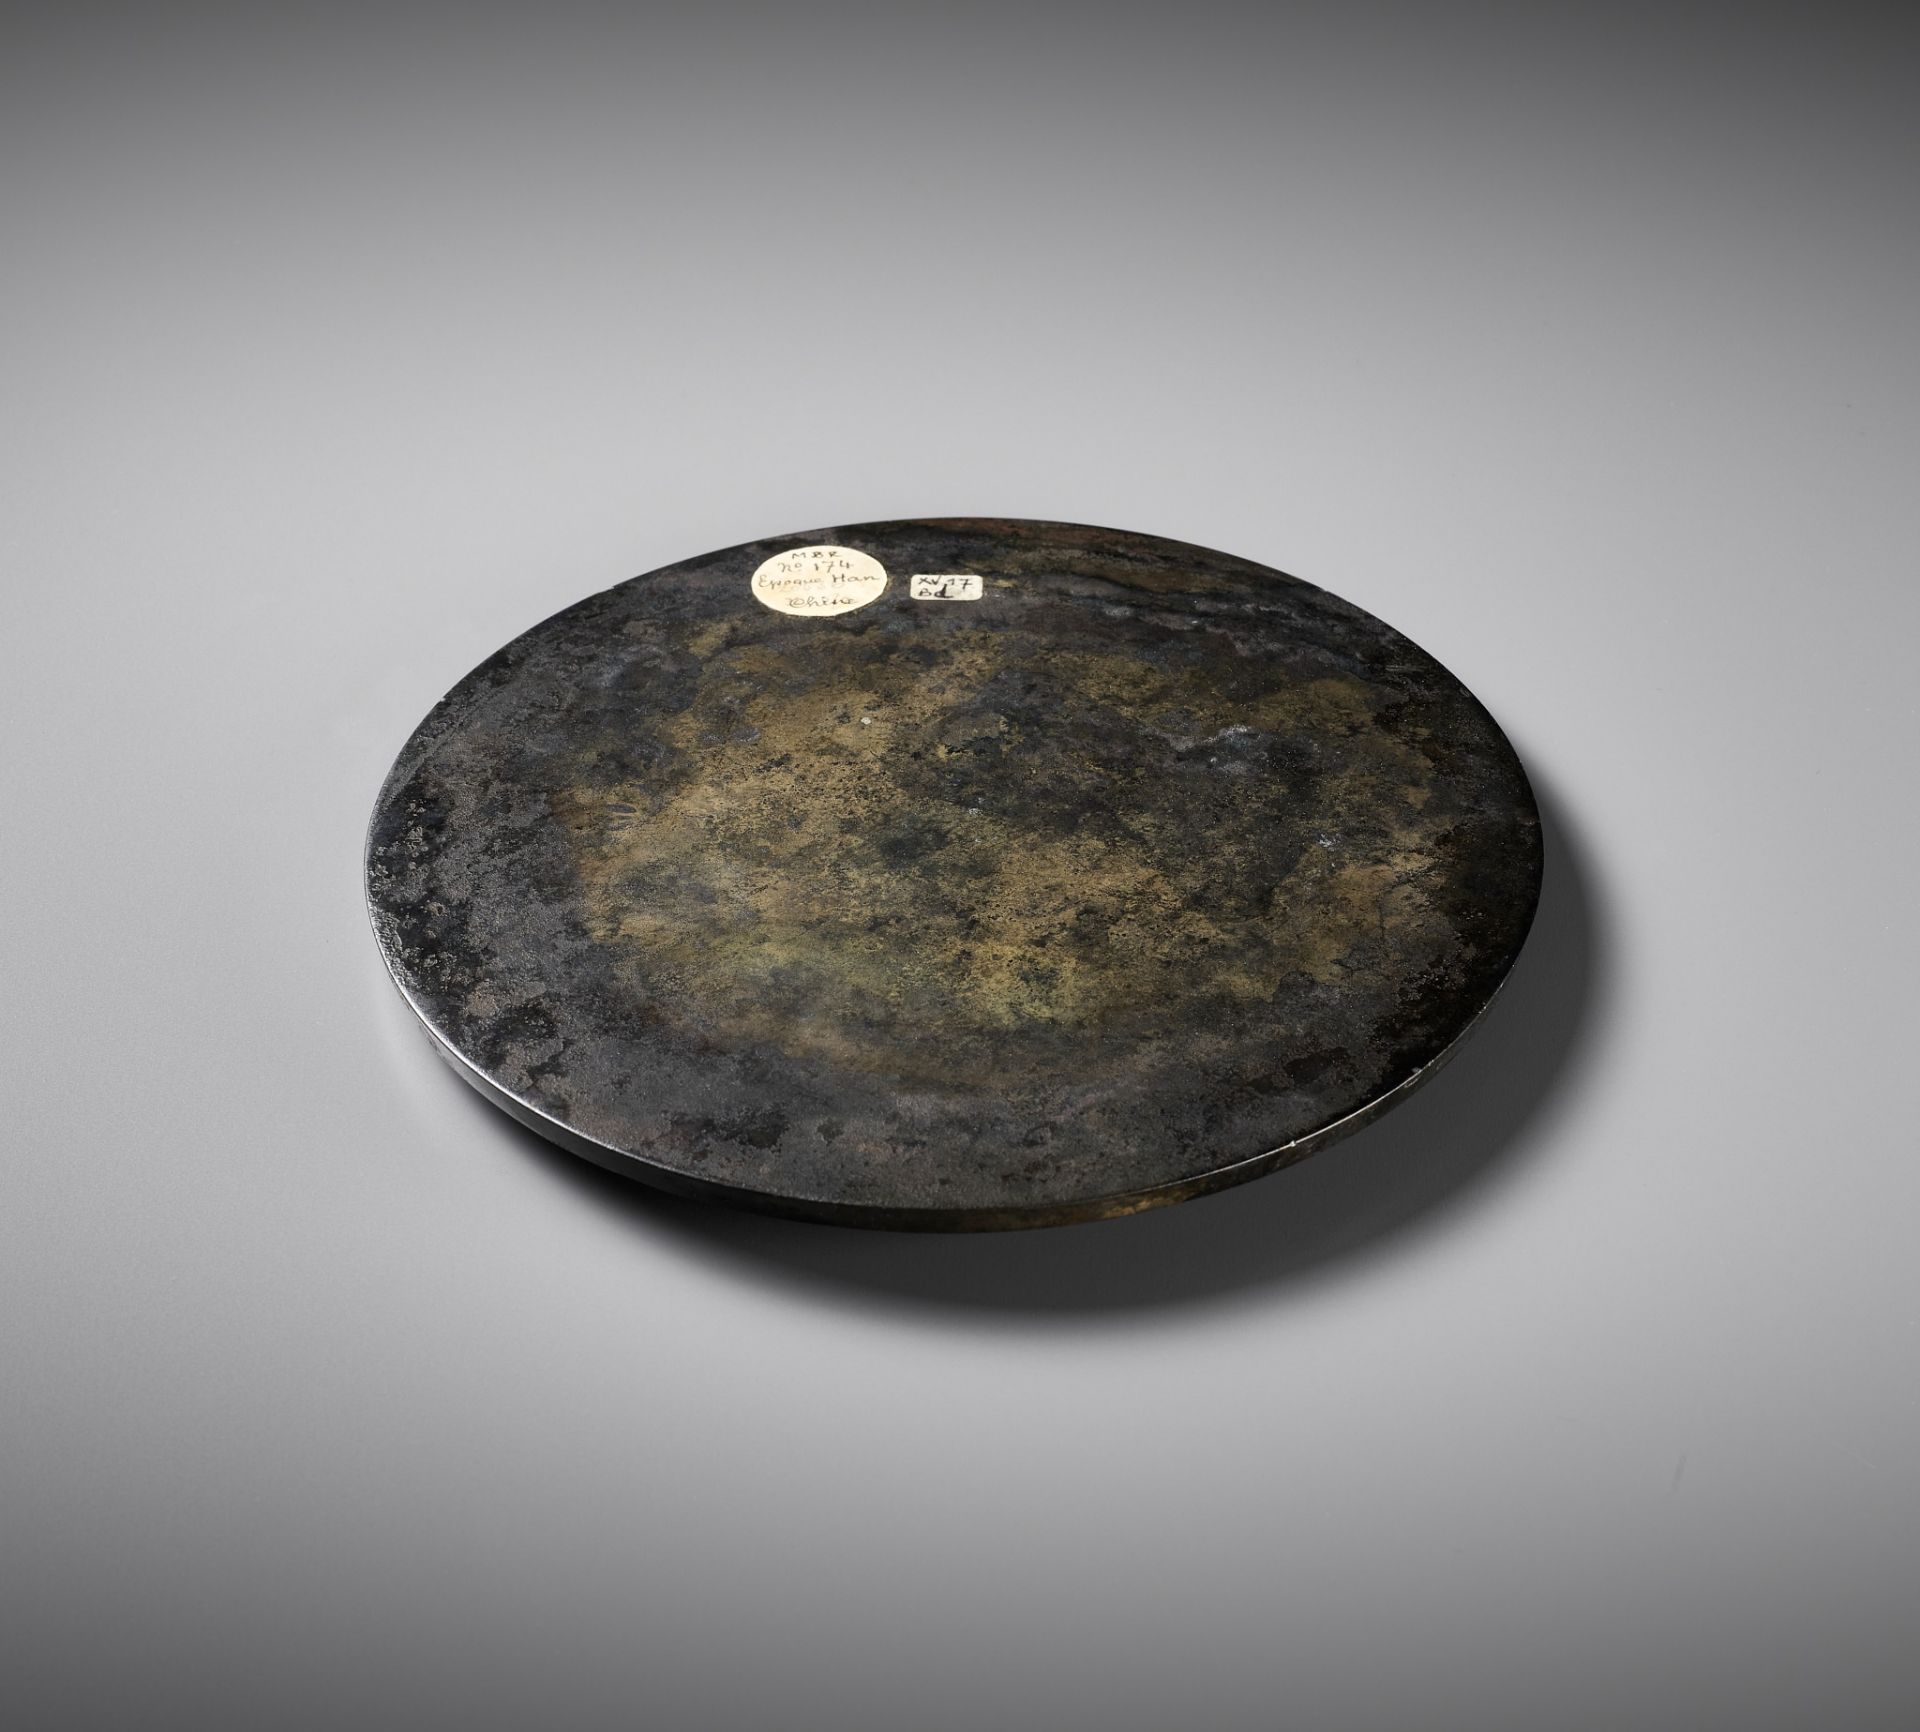 A LARGE BRONZE MIRROR WITH A 37-CHARACTER INSCRIPTION, HAN DYNASTY, CHINA, 206 BC-220 AD - Image 8 of 16